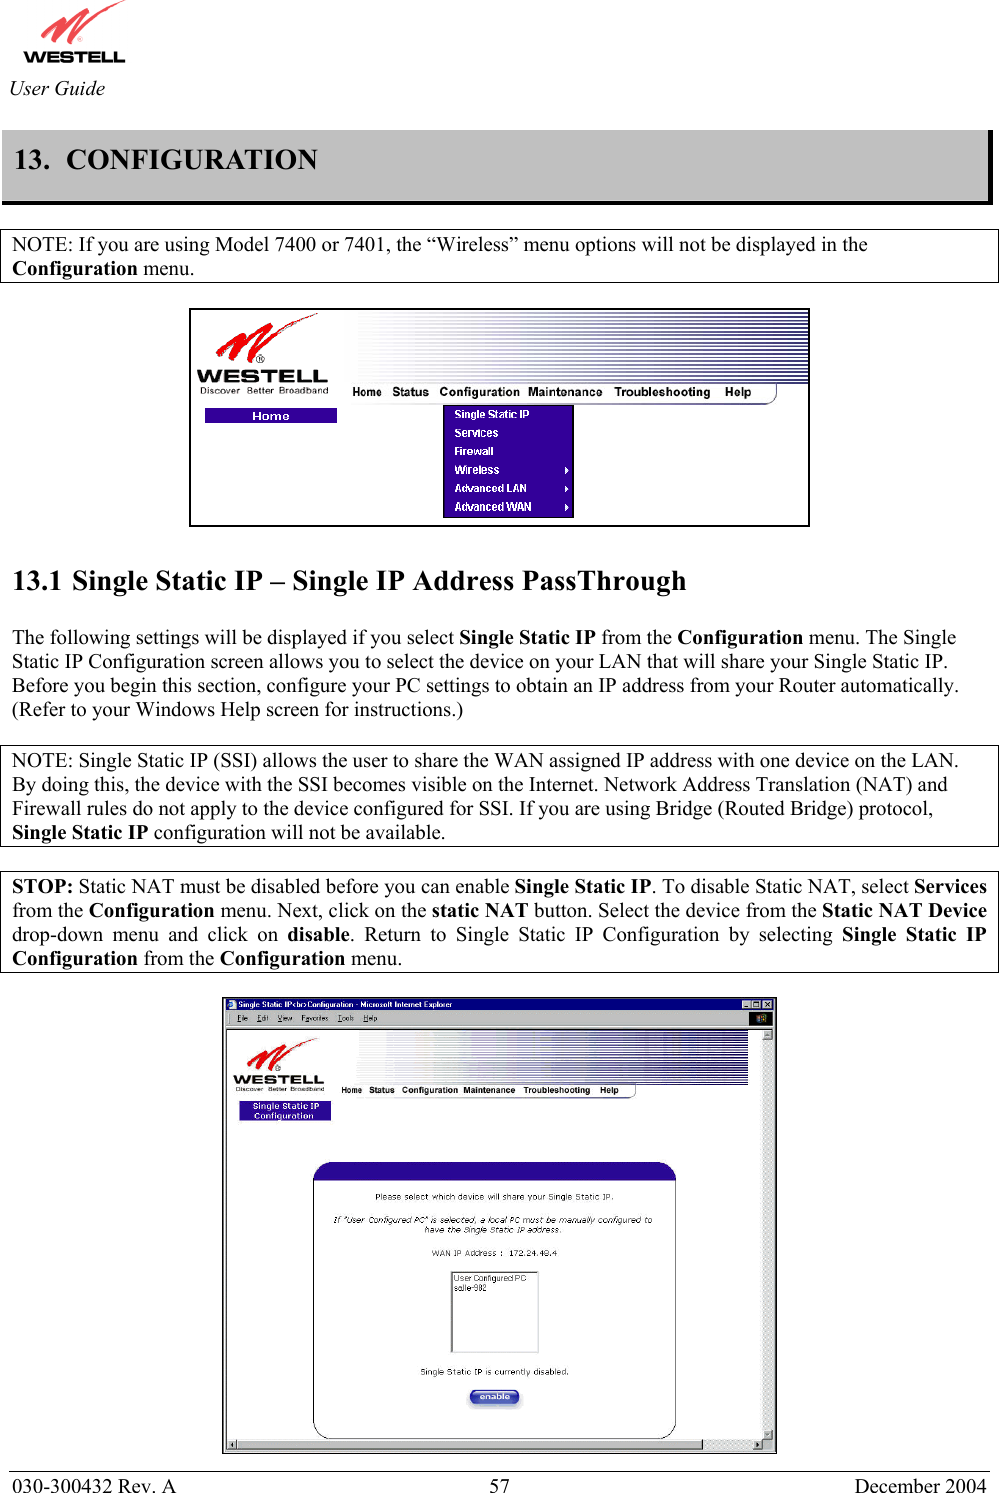       030-300432 Rev. A  57 December 2004  User Guide 13.  CONFIGURATION  NOTE: If you are using Model 7400 or 7401, the “Wireless” menu options will not be displayed in the Configuration menu.    13.1 Single Static IP – Single IP Address PassThrough  The following settings will be displayed if you select Single Static IP from the Configuration menu. The Single Static IP Configuration screen allows you to select the device on your LAN that will share your Single Static IP. Before you begin this section, configure your PC settings to obtain an IP address from your Router automatically. (Refer to your Windows Help screen for instructions.)  NOTE: Single Static IP (SSI) allows the user to share the WAN assigned IP address with one device on the LAN. By doing this, the device with the SSI becomes visible on the Internet. Network Address Translation (NAT) and Firewall rules do not apply to the device configured for SSI. If you are using Bridge (Routed Bridge) protocol, Single Static IP configuration will not be available.  STOP: Static NAT must be disabled before you can enable Single Static IP. To disable Static NAT, select Services from the Configuration menu. Next, click on the static NAT button. Select the device from the Static NAT Device drop-down menu and click on disable. Return to Single Static IP Configuration by selecting Single Static IP Configuration from the Configuration menu.   